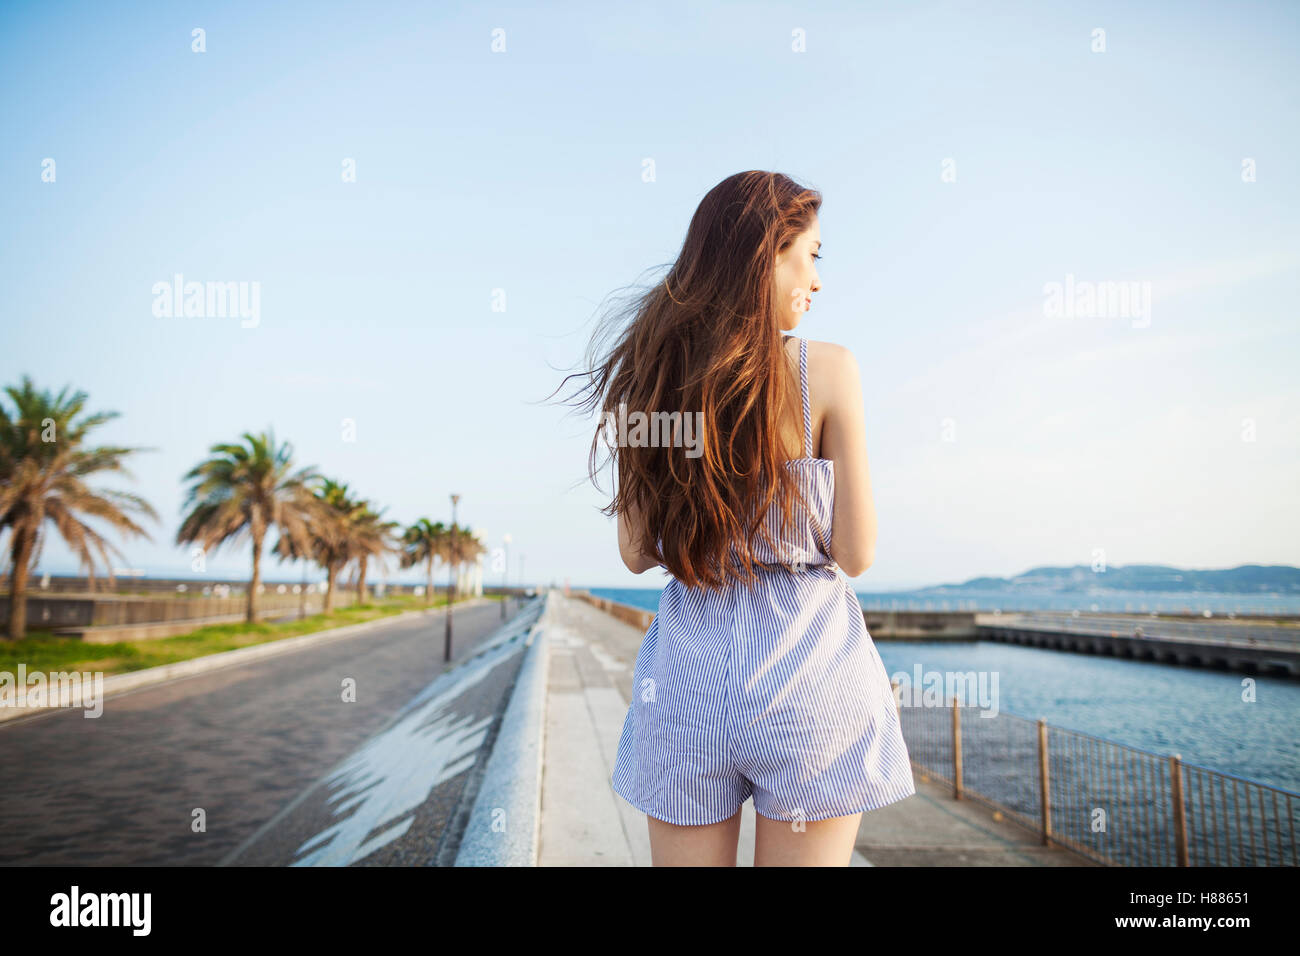 Back view of young woman with long red hair standing in open space by a road on the coast. Stock Photo